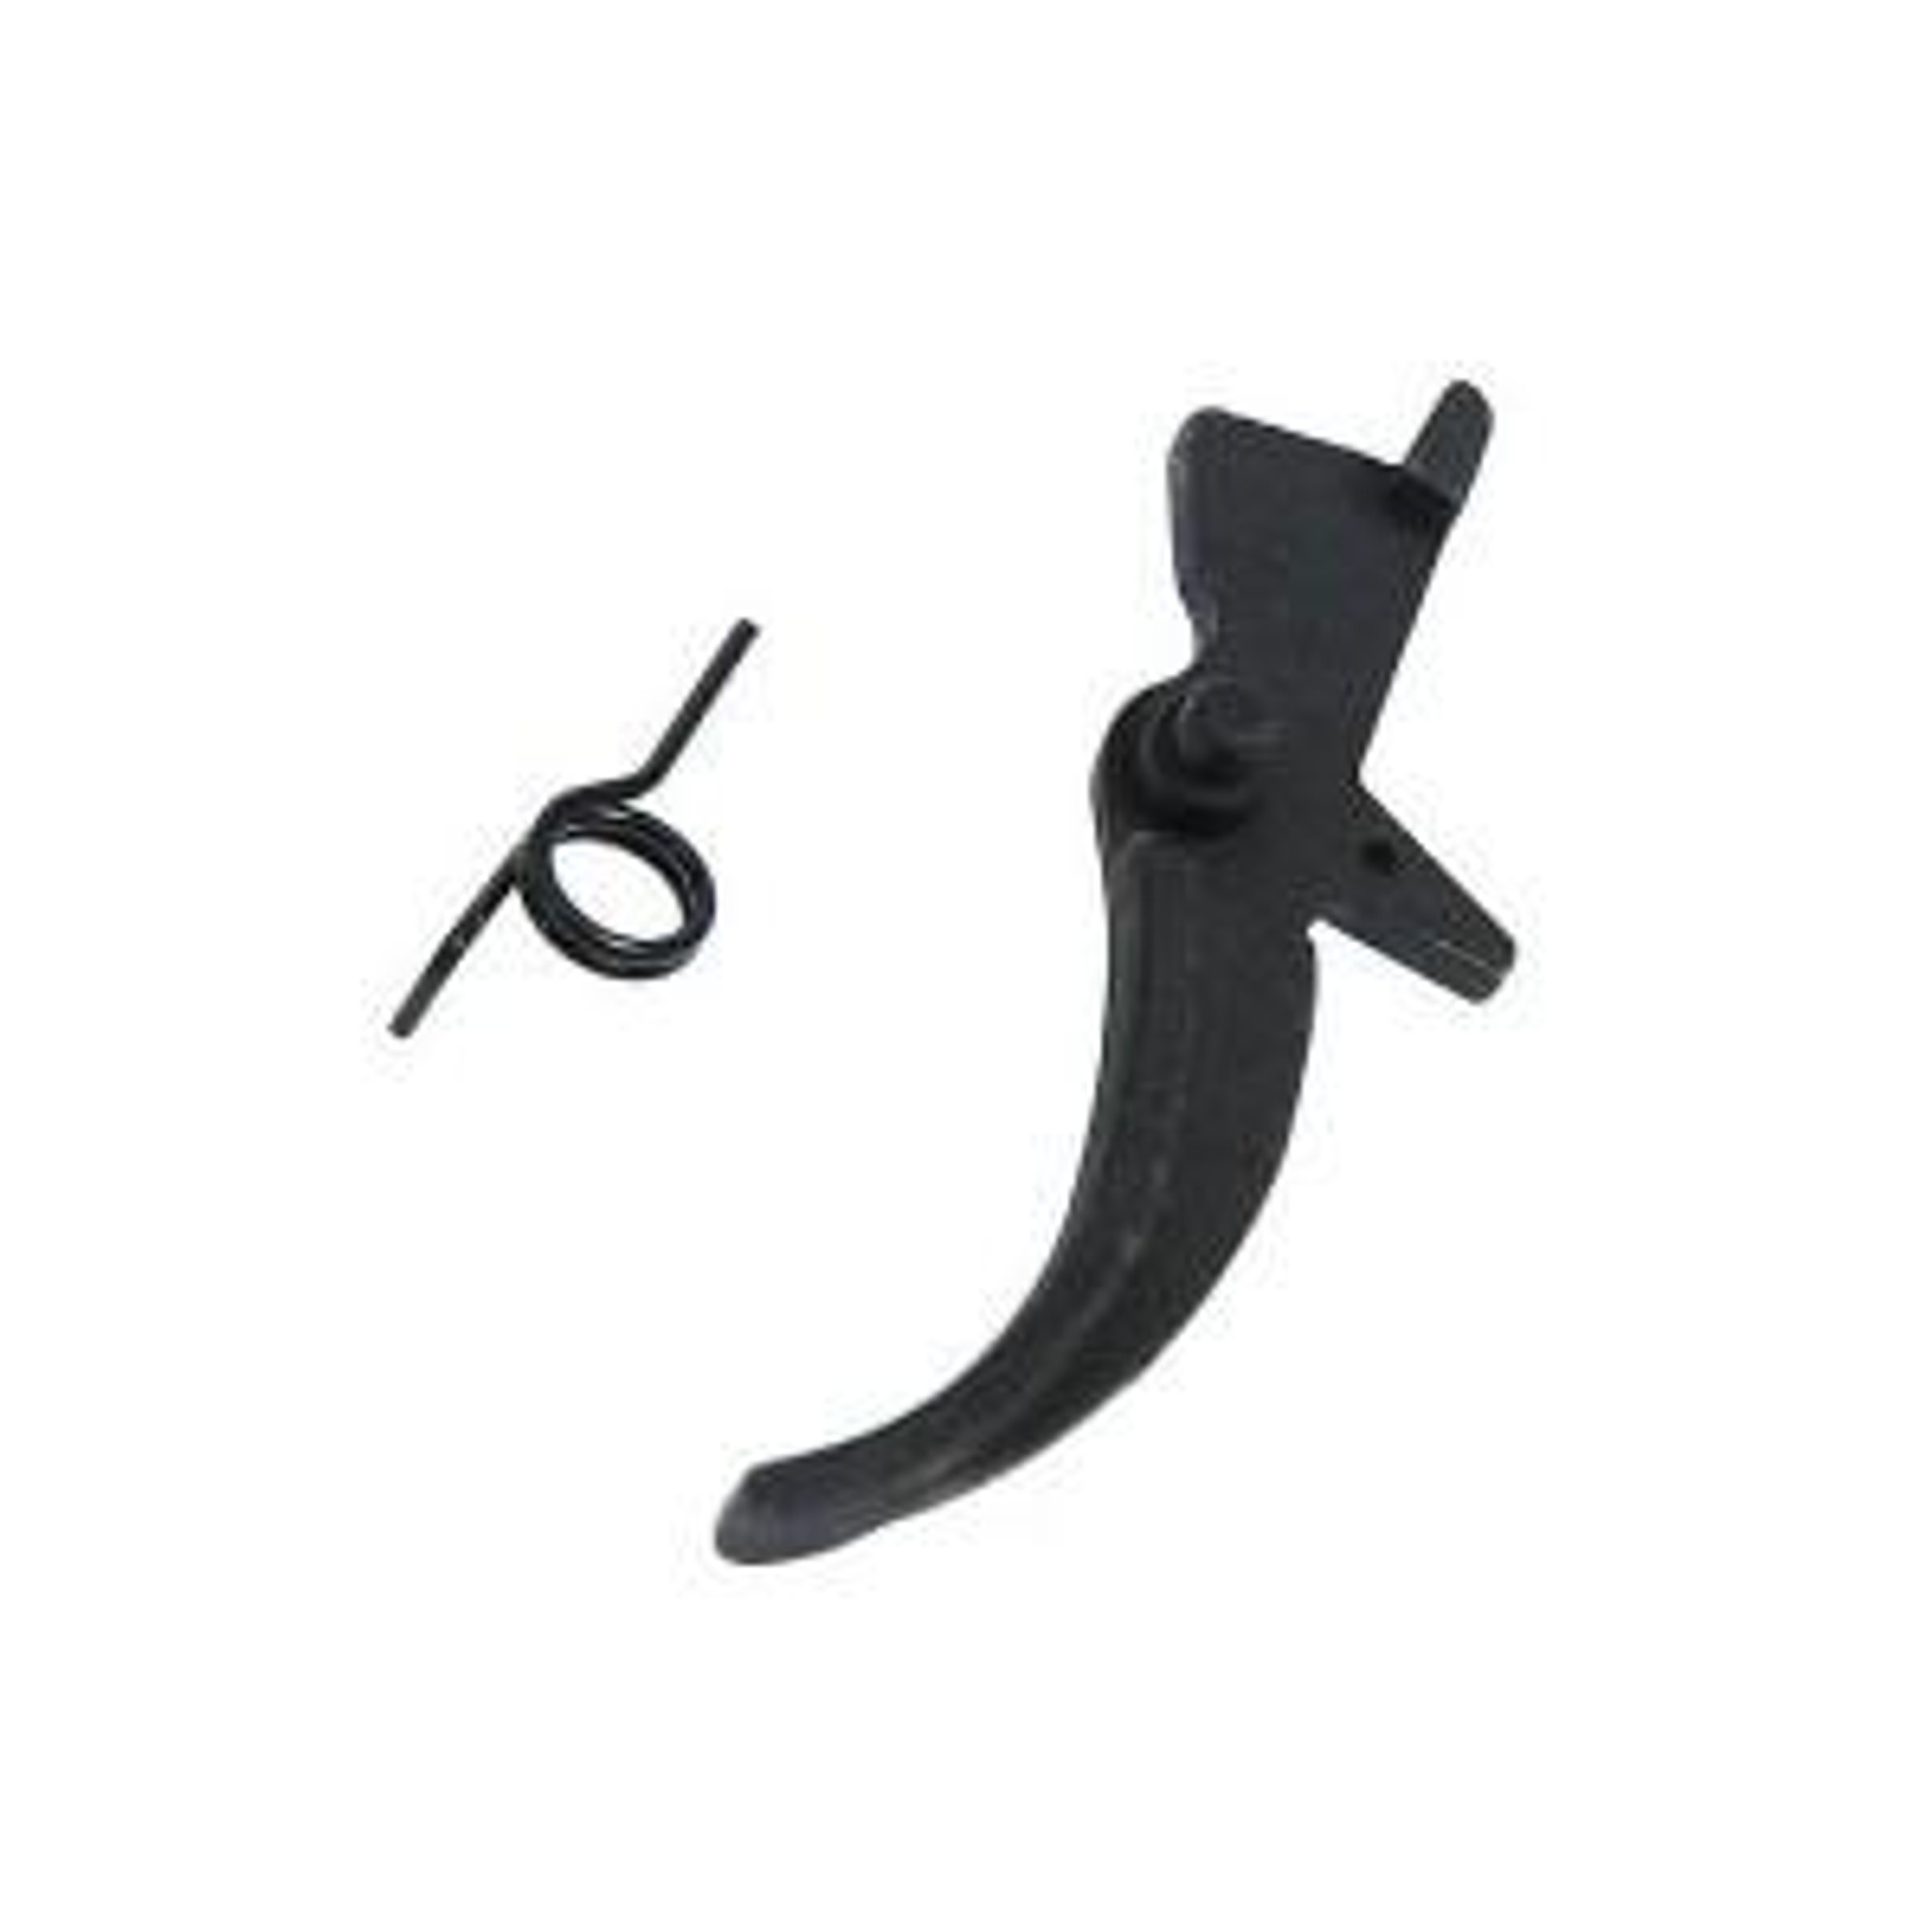 Madbull Airsoft Trigger with Spring for M4/M16 (STTR)